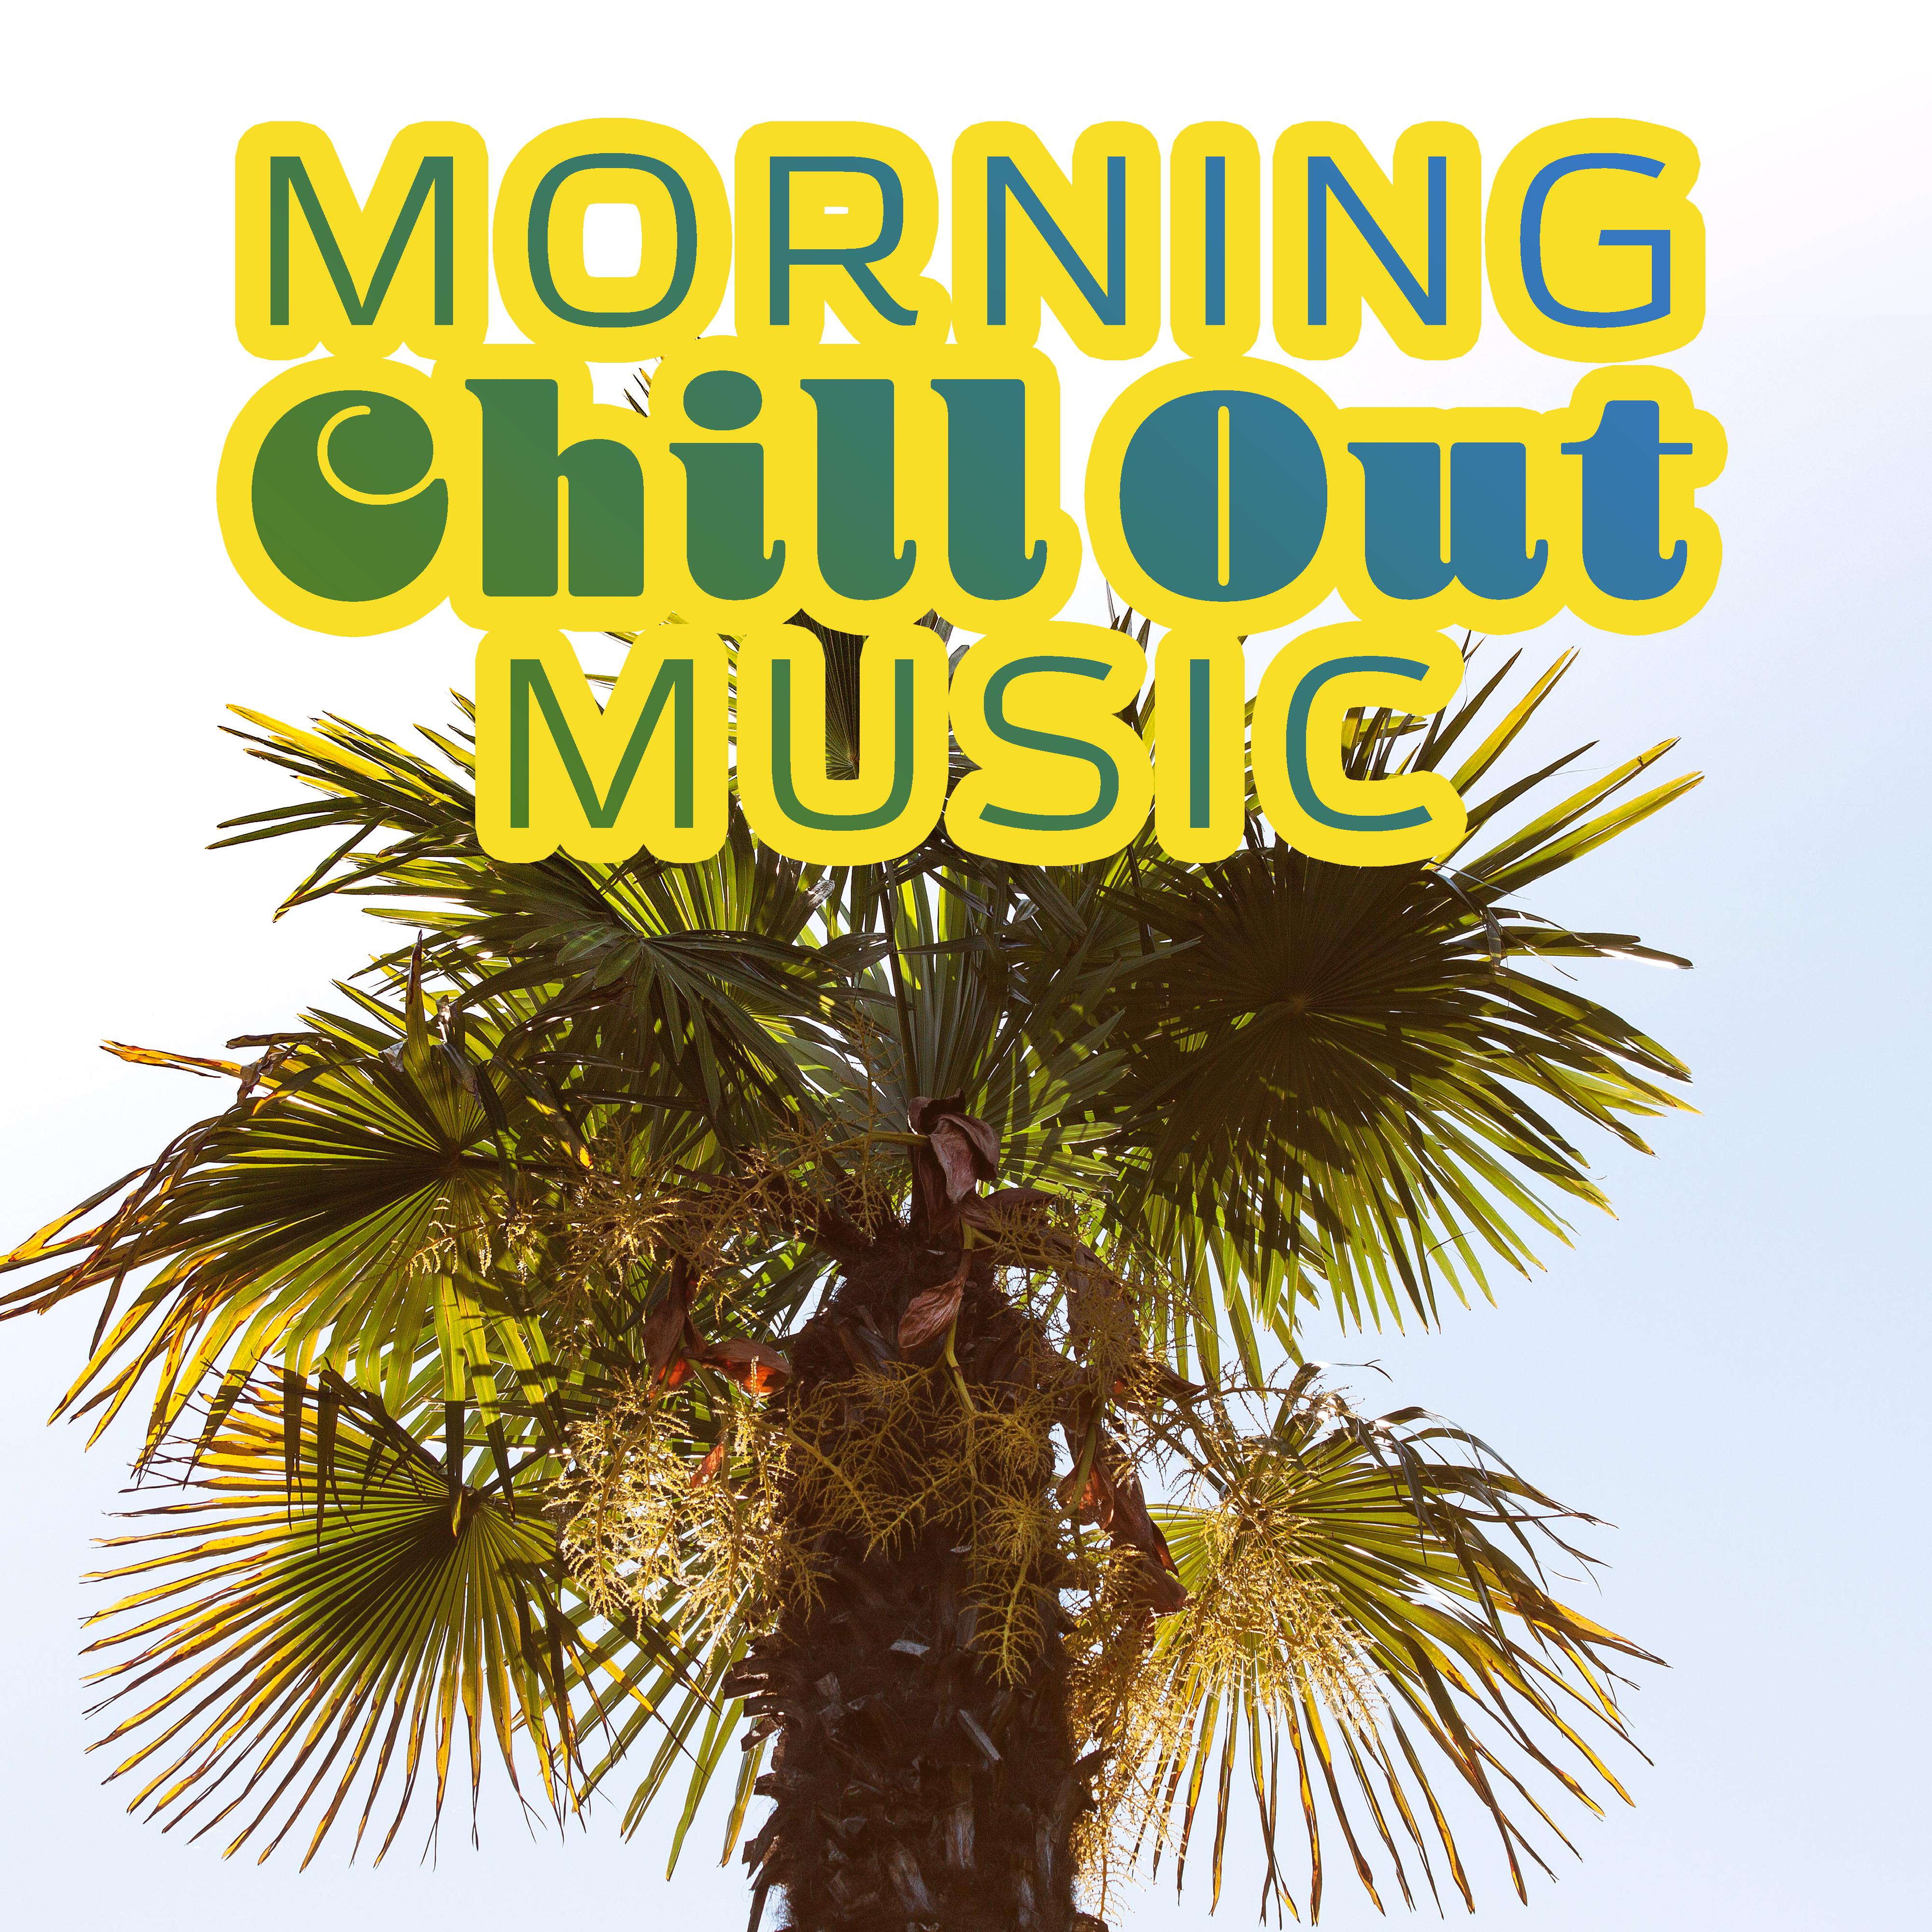 Morning Chill Out Music  Summer Calm Sounds, Holiday Relaxation, Sunrise Chill Out, Soothing Vibes